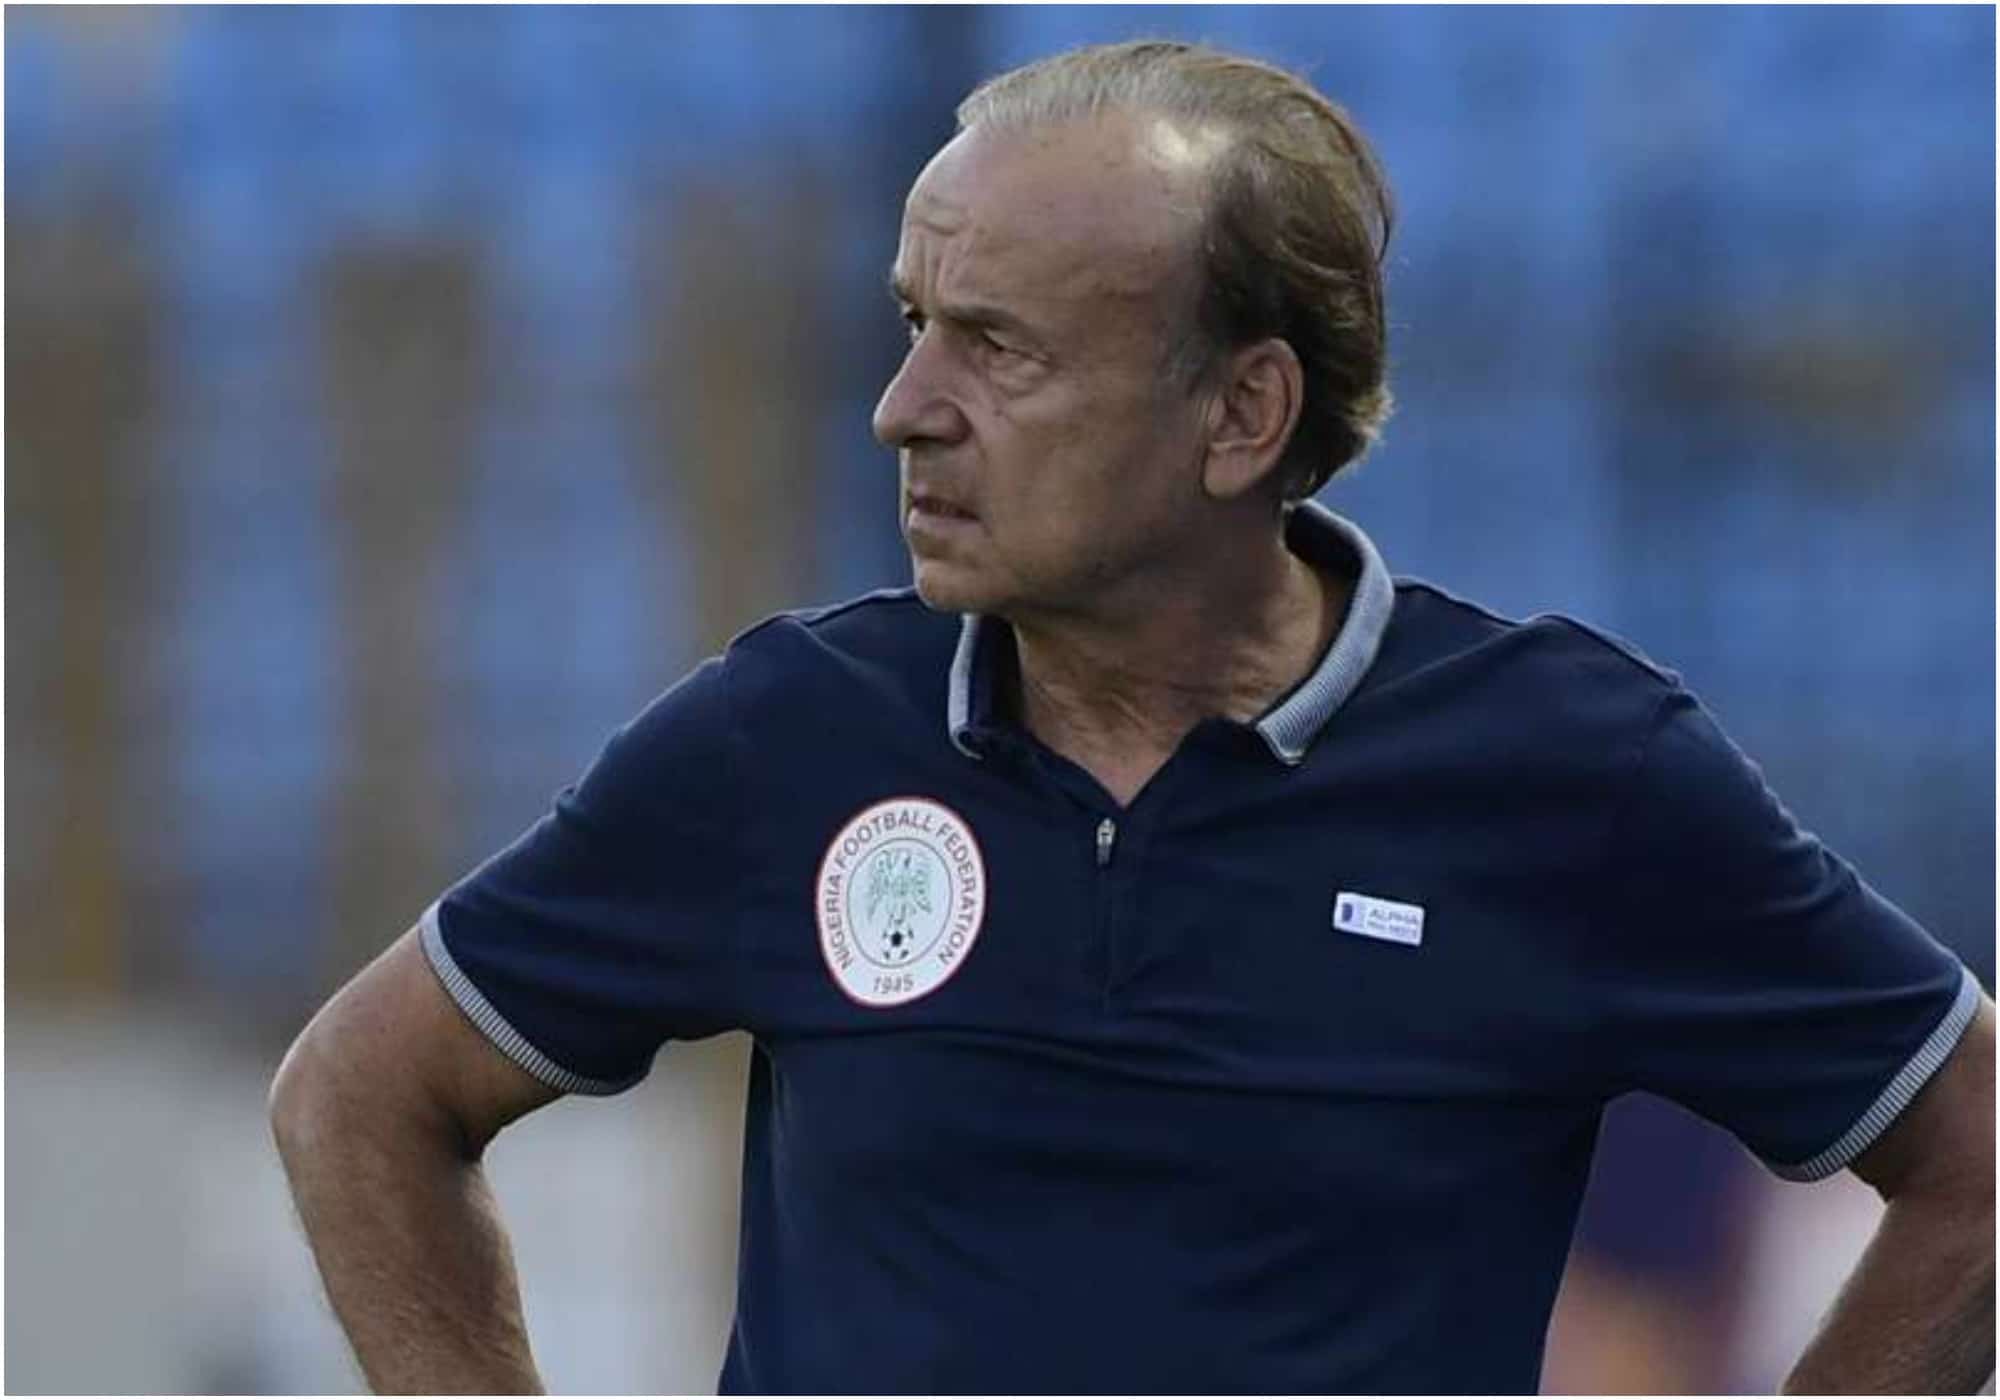 NFF begs ex-Super Eagles coach, Rohr over oustanding debt